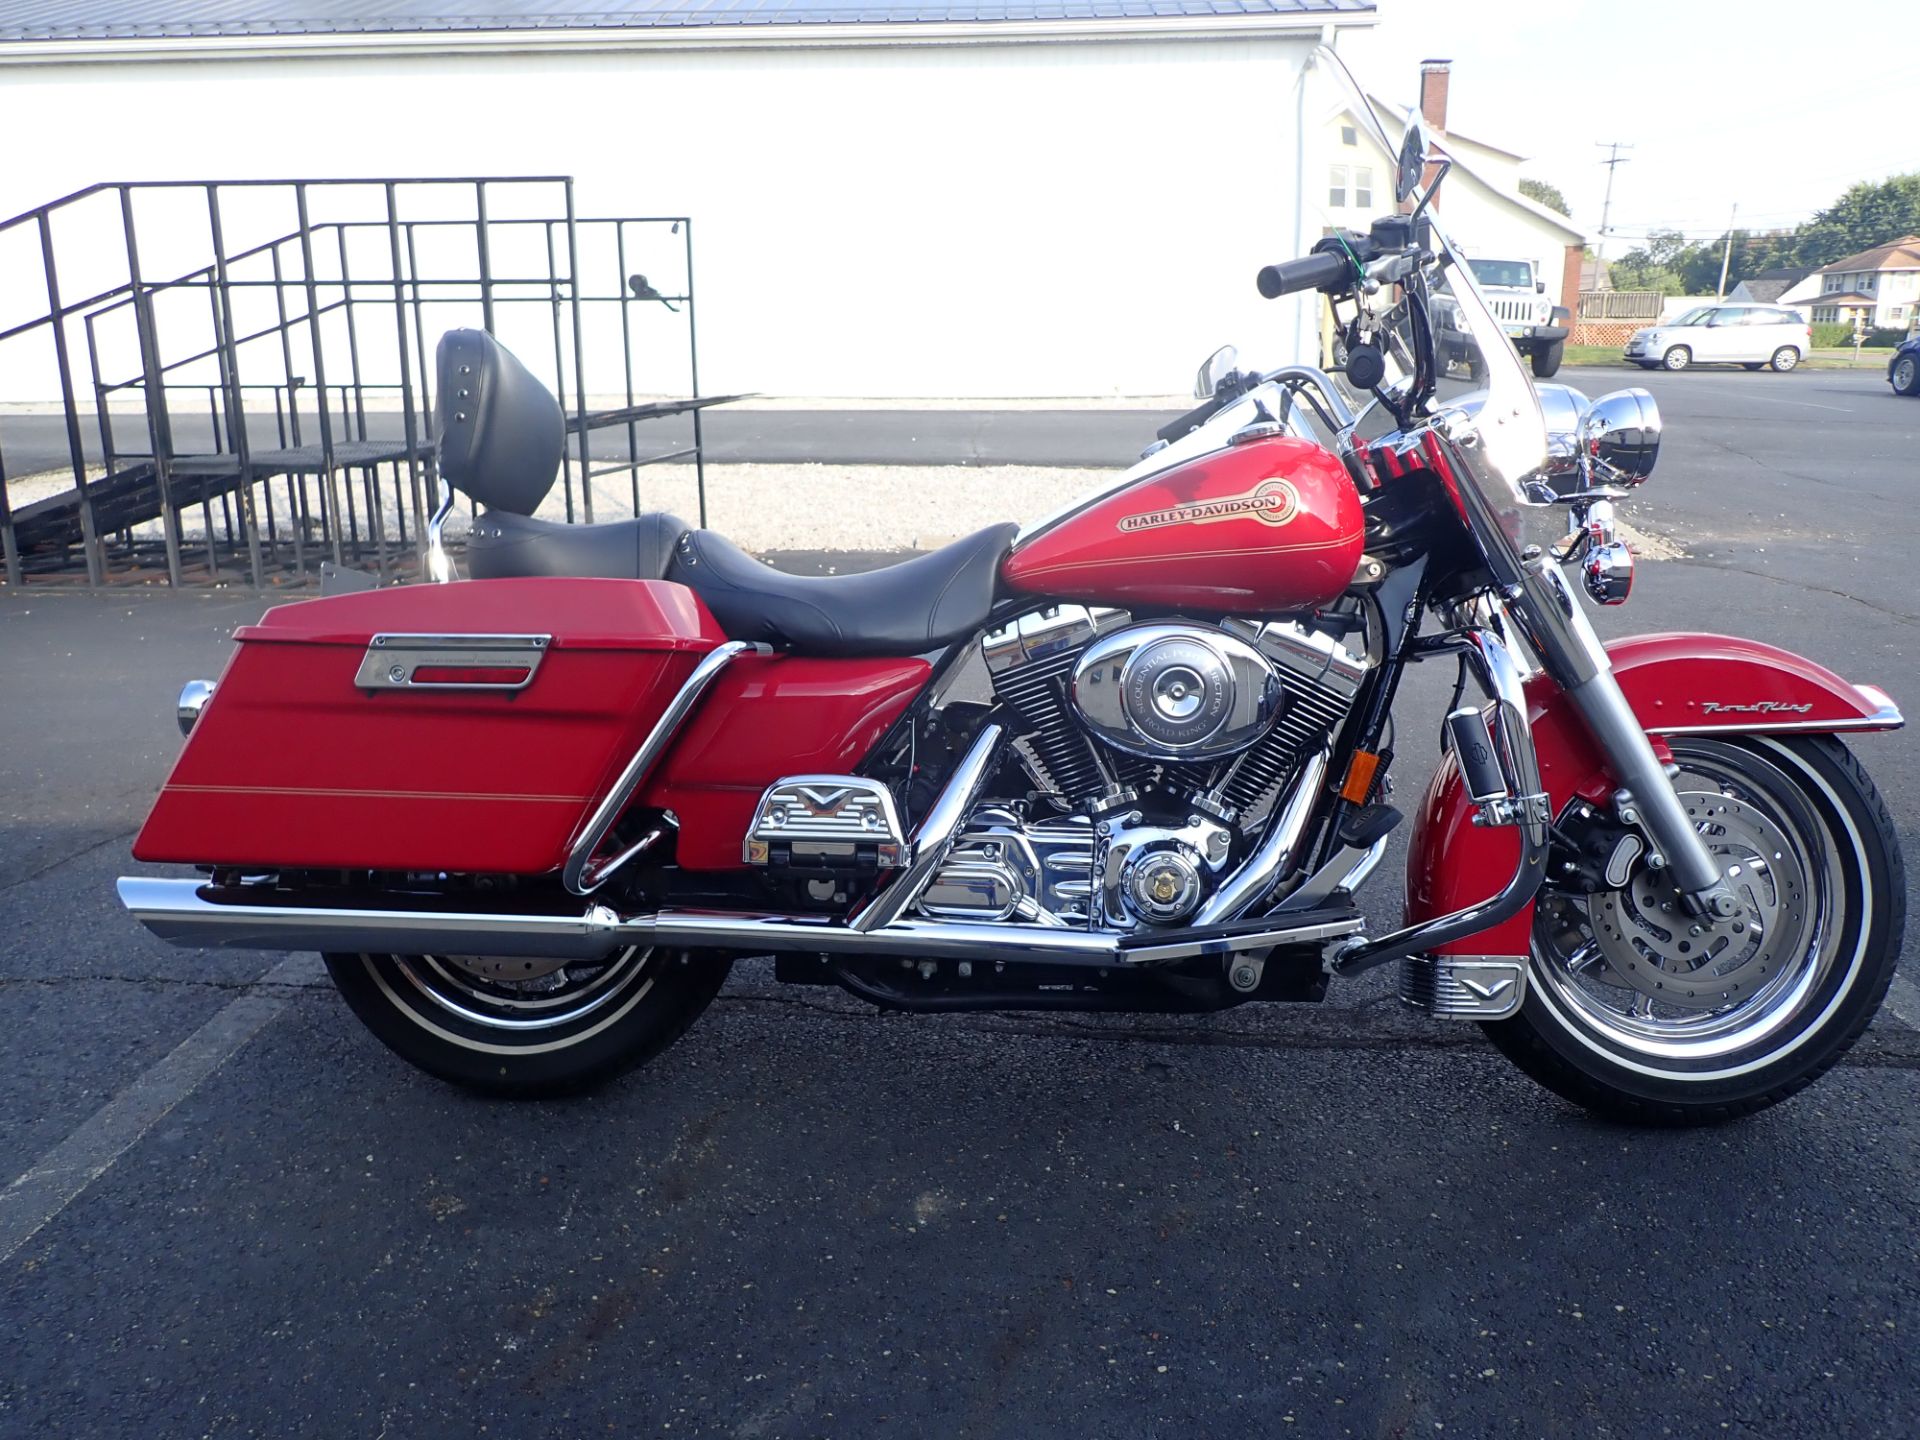 2006 Harley-Davidson Road King® Firefighter Special Edition in Massillon, Ohio - Photo 1